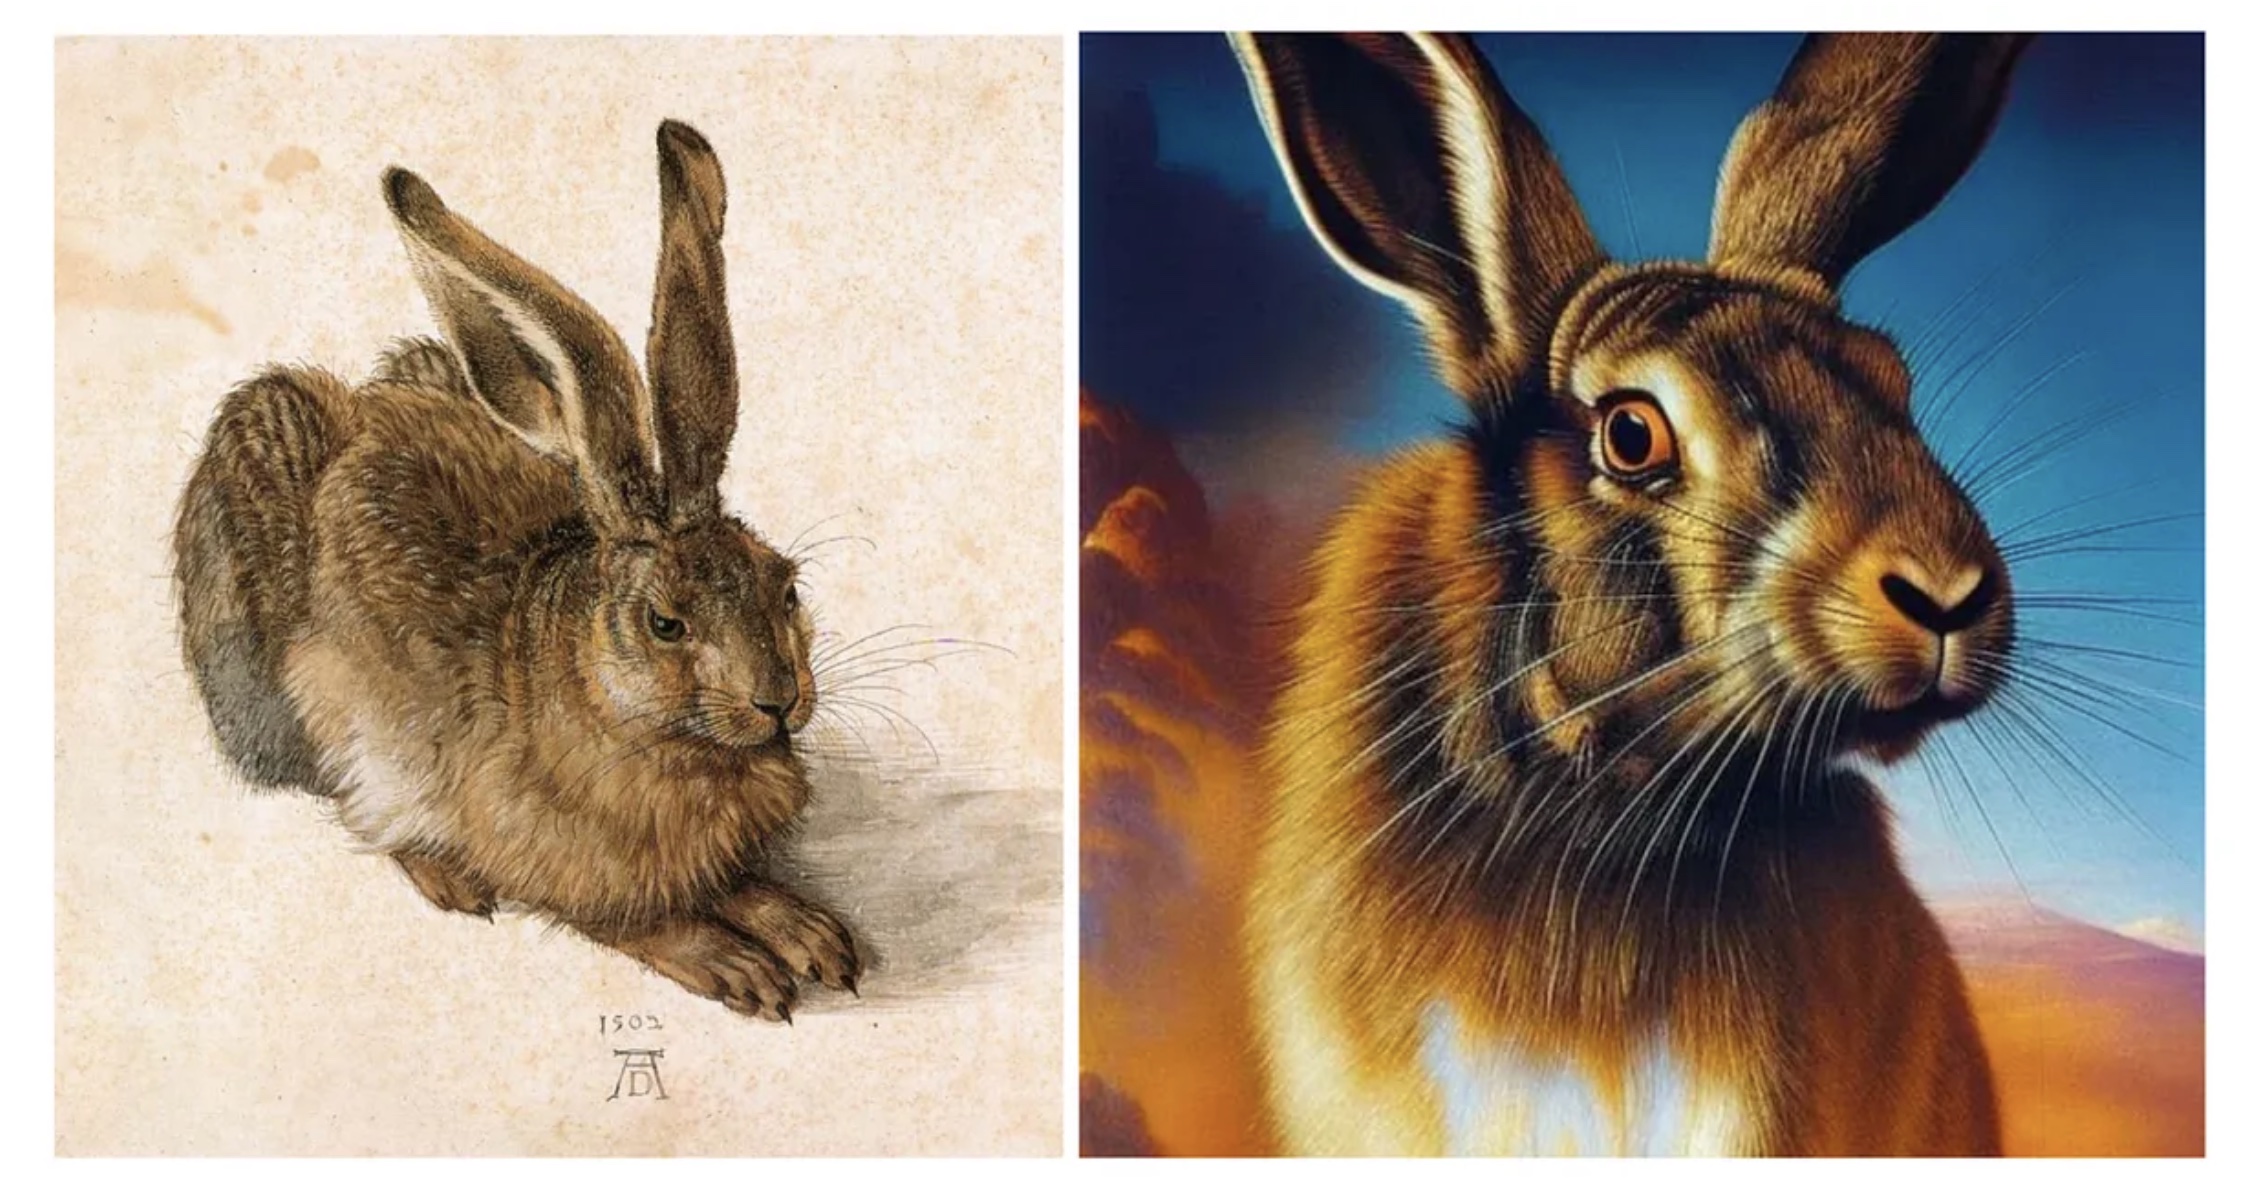 Figure 2: Young Hare by Albrecht Dürer, 1502 (left), Hare by AI, 2022 (right).